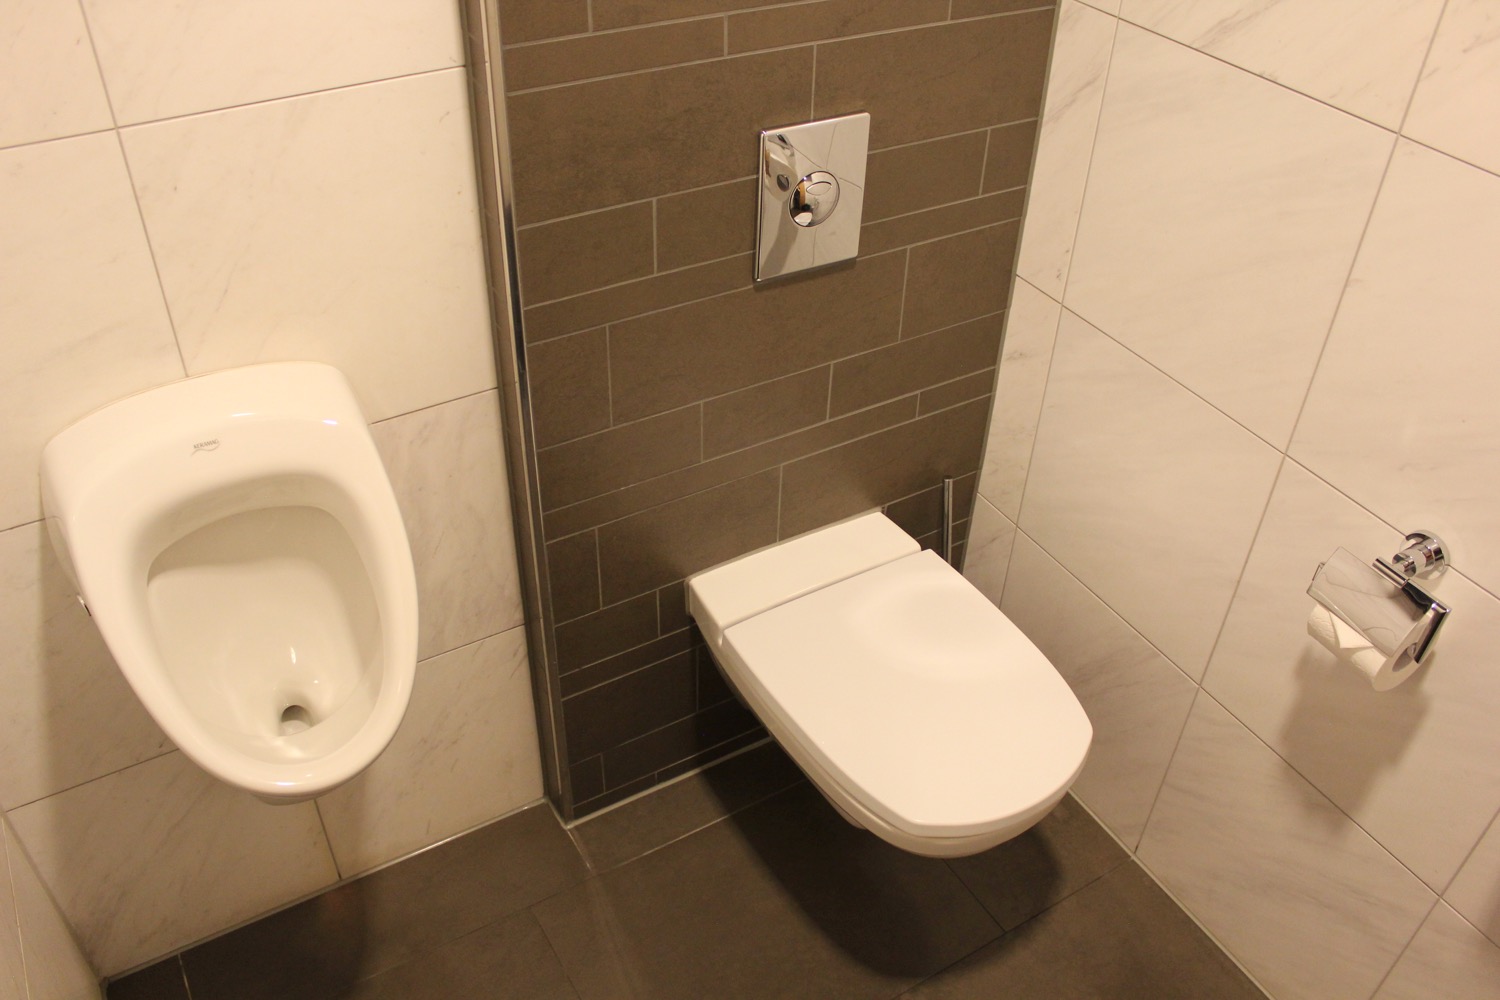 a toilet and urinal in a bathroom